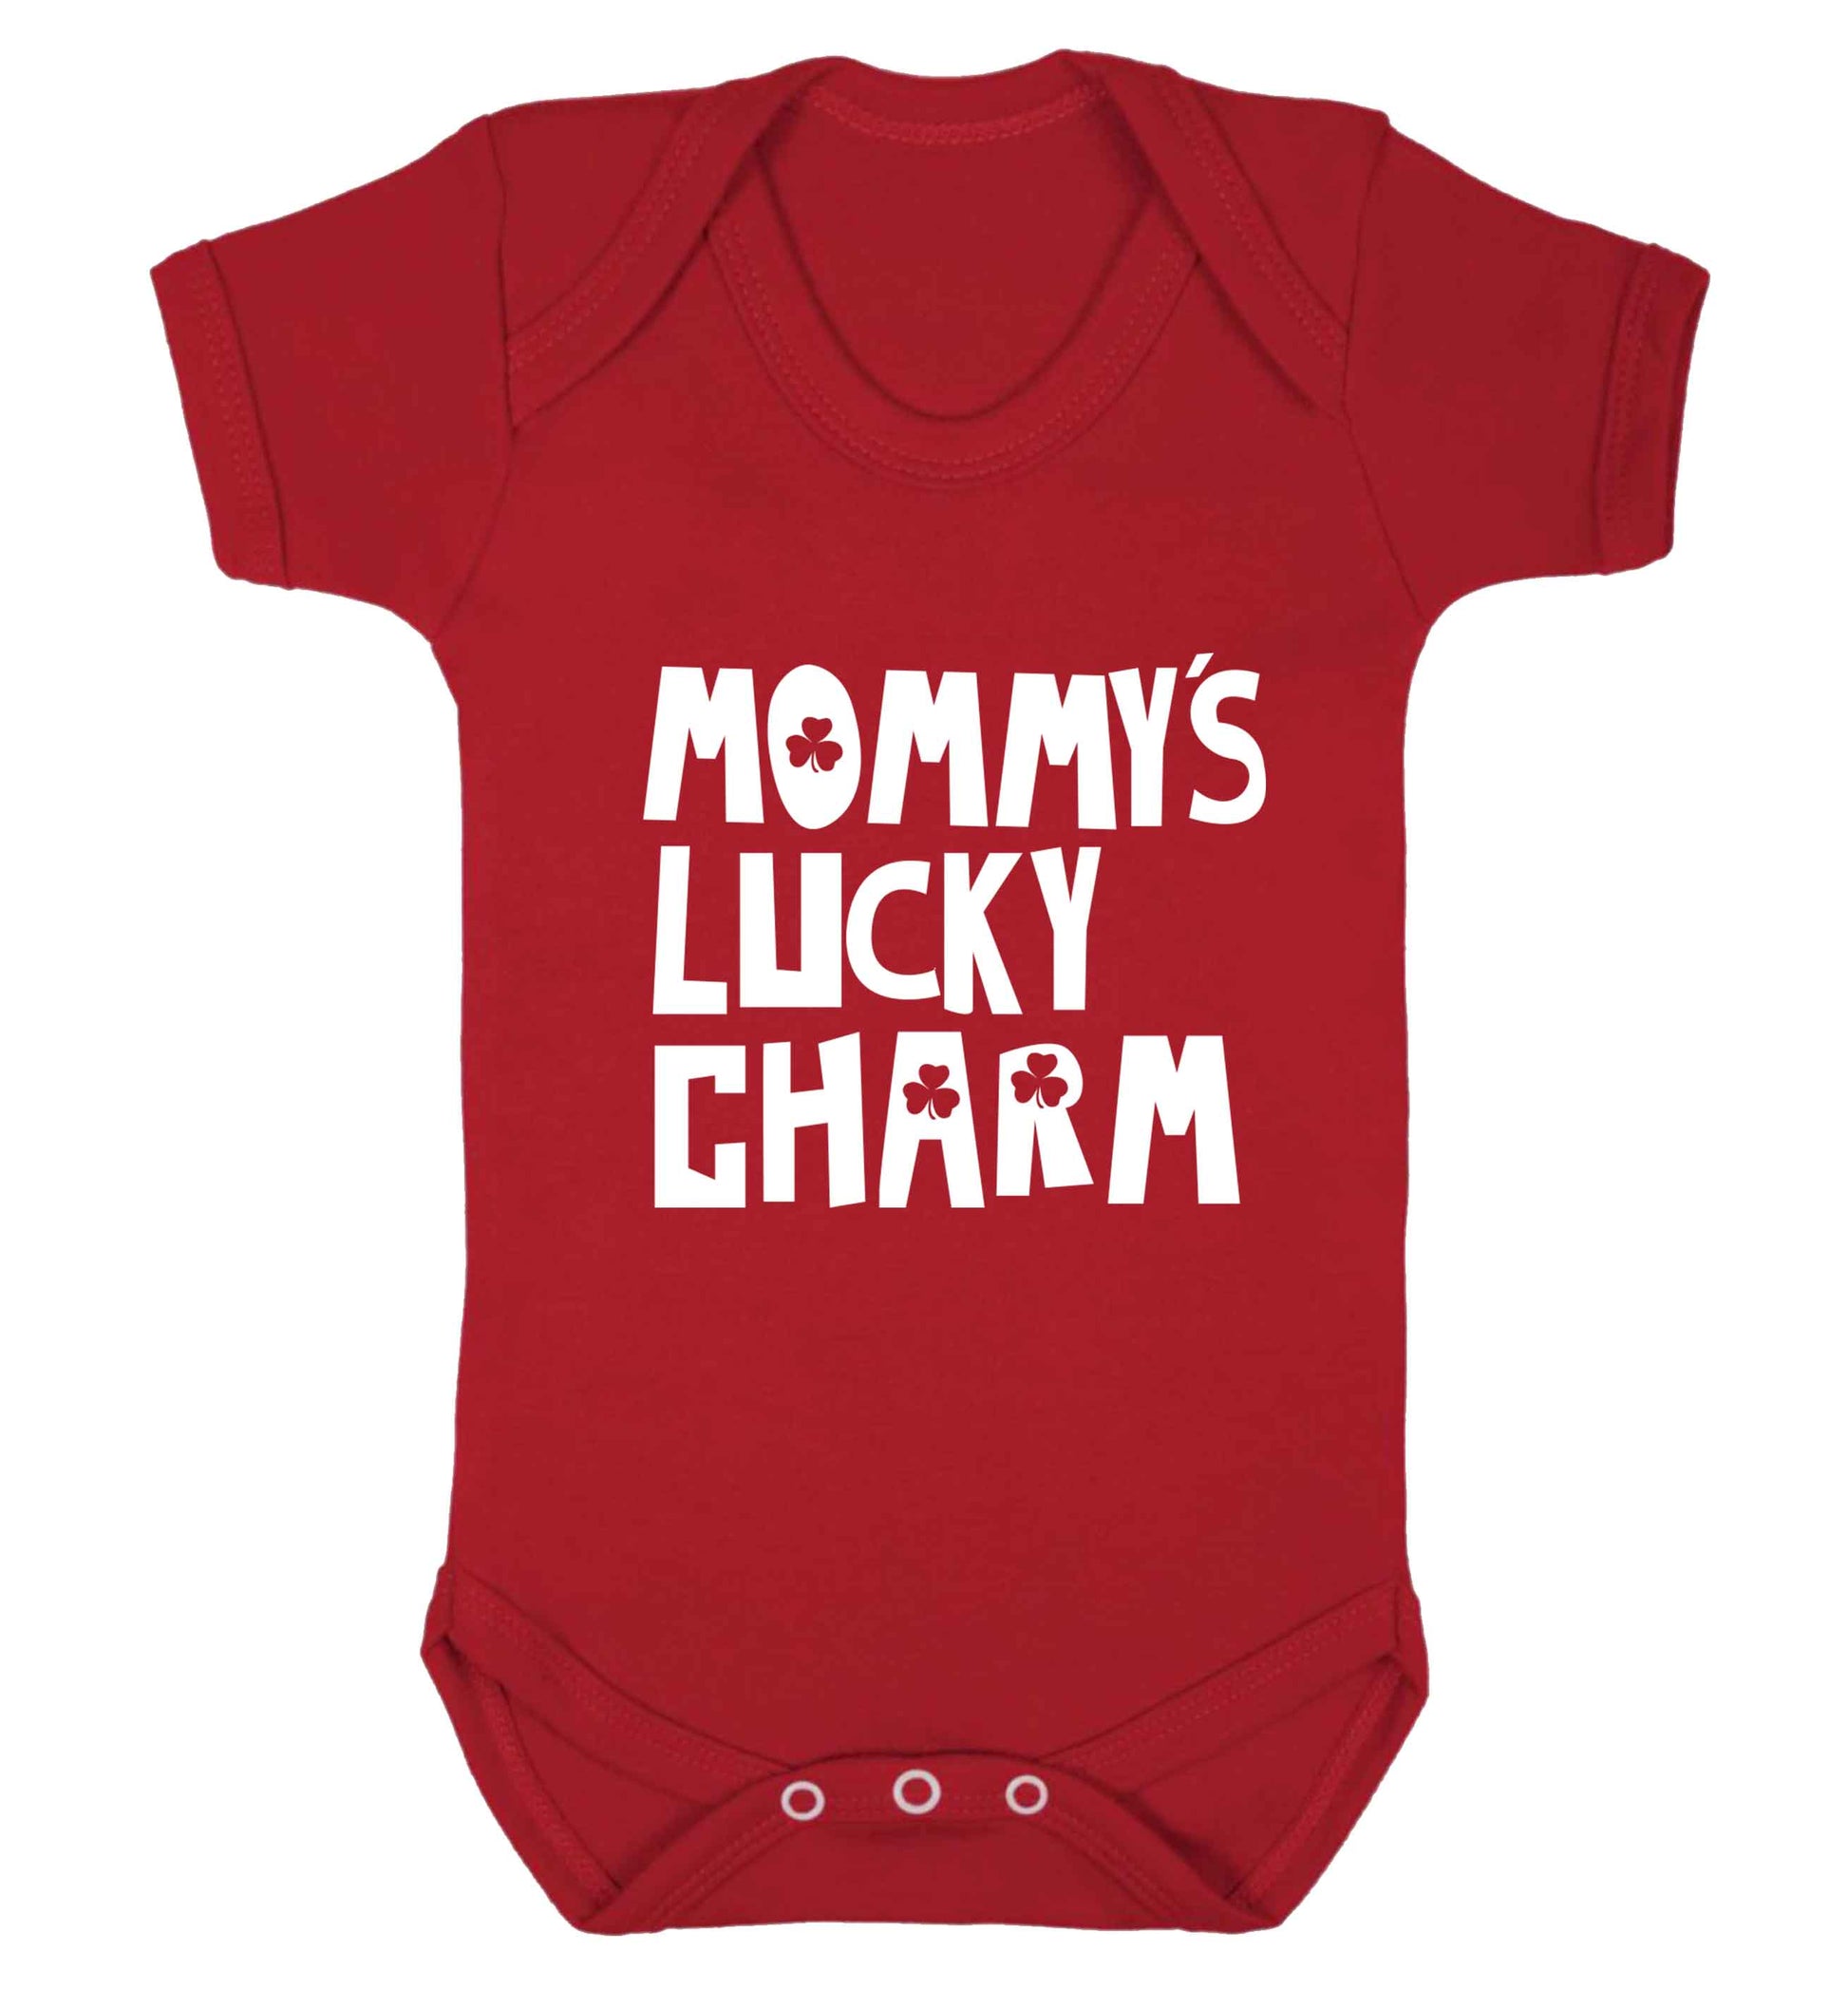 Mommy's lucky charm baby vest red 18-24 months